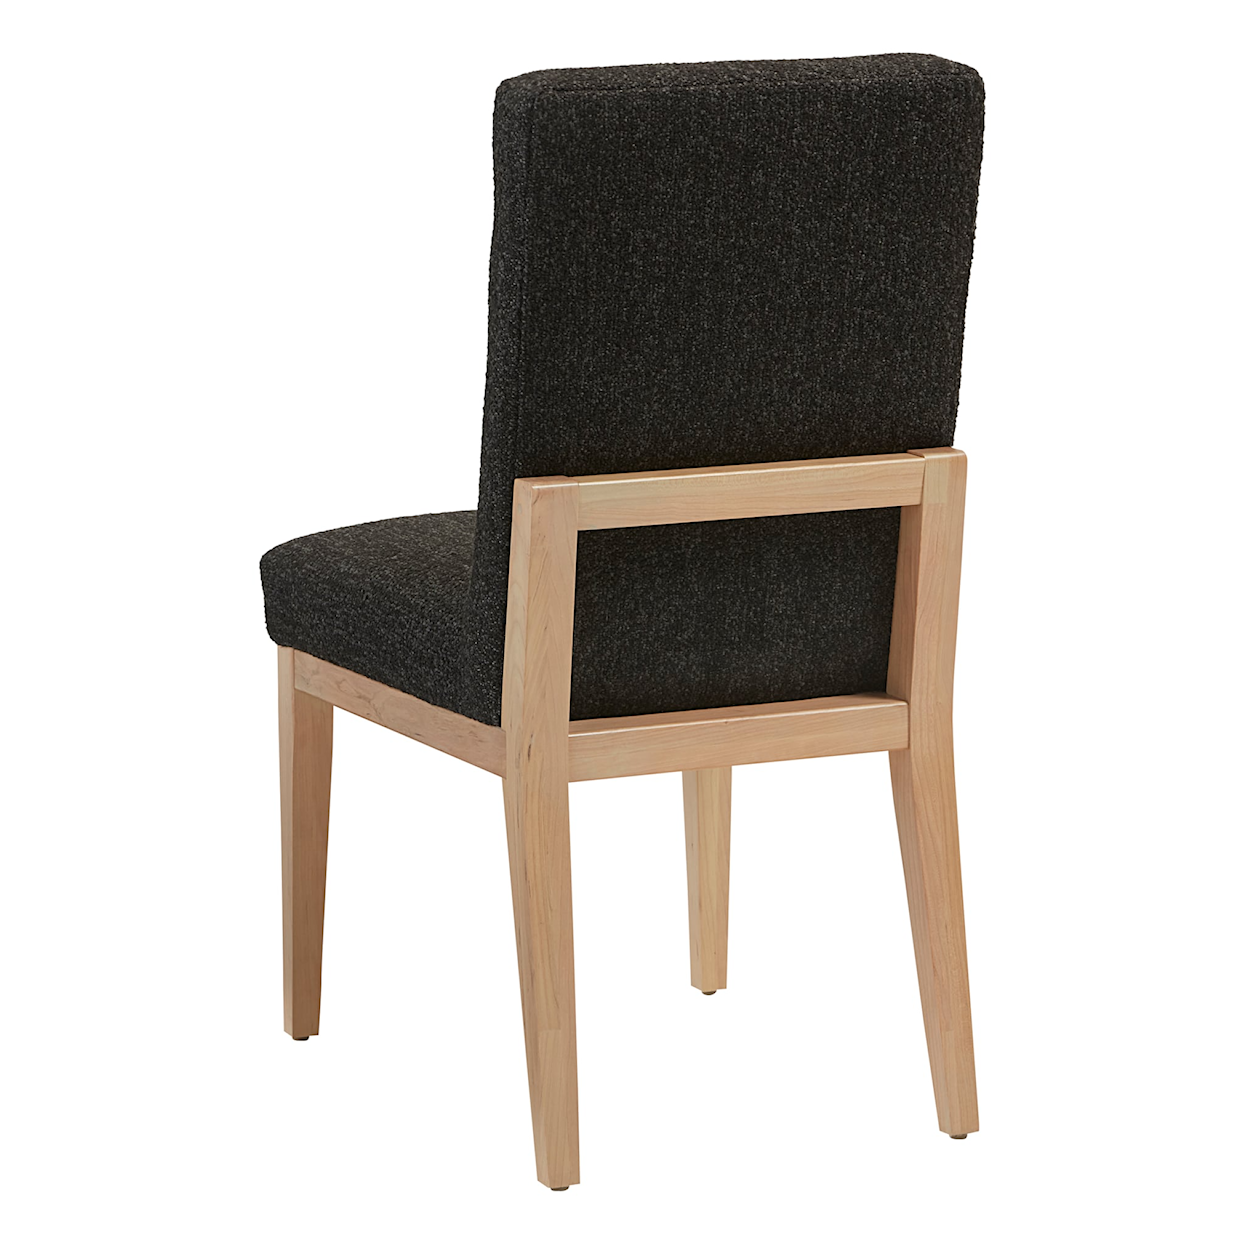 Virginia House Crafted Cherry - Bleached Upholstered Side Dining Chair